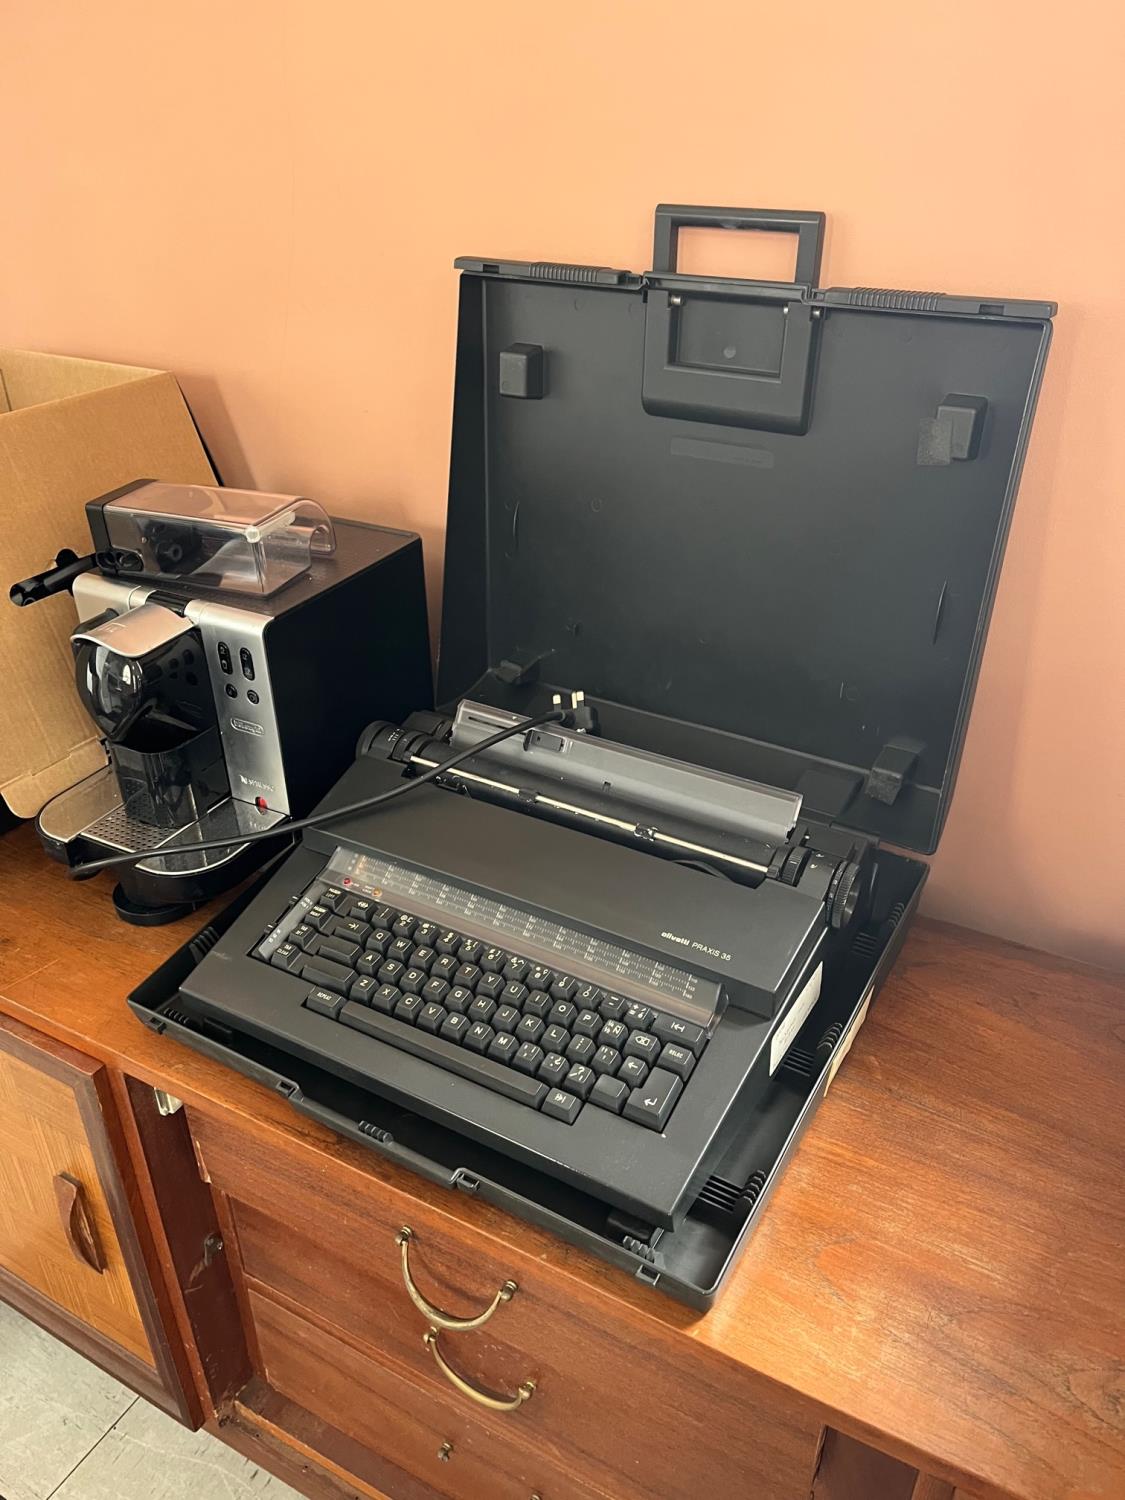 DeLonghi coffee machine and a vintage electric Olivetti typewriter